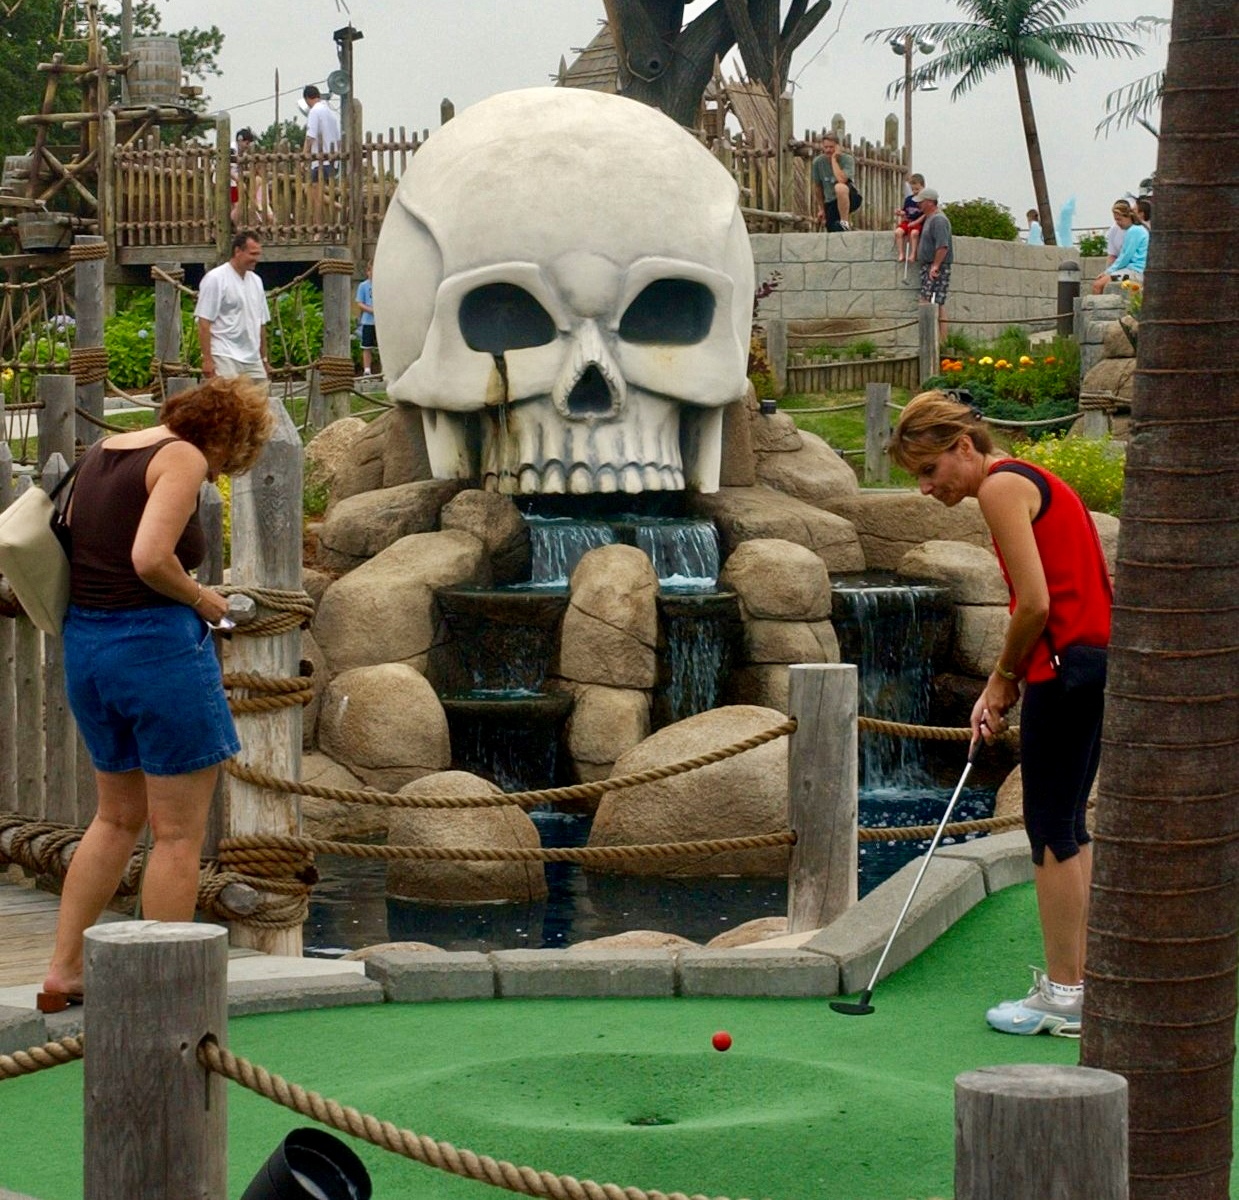 Epic miniature golf tournament in Yarmouth!